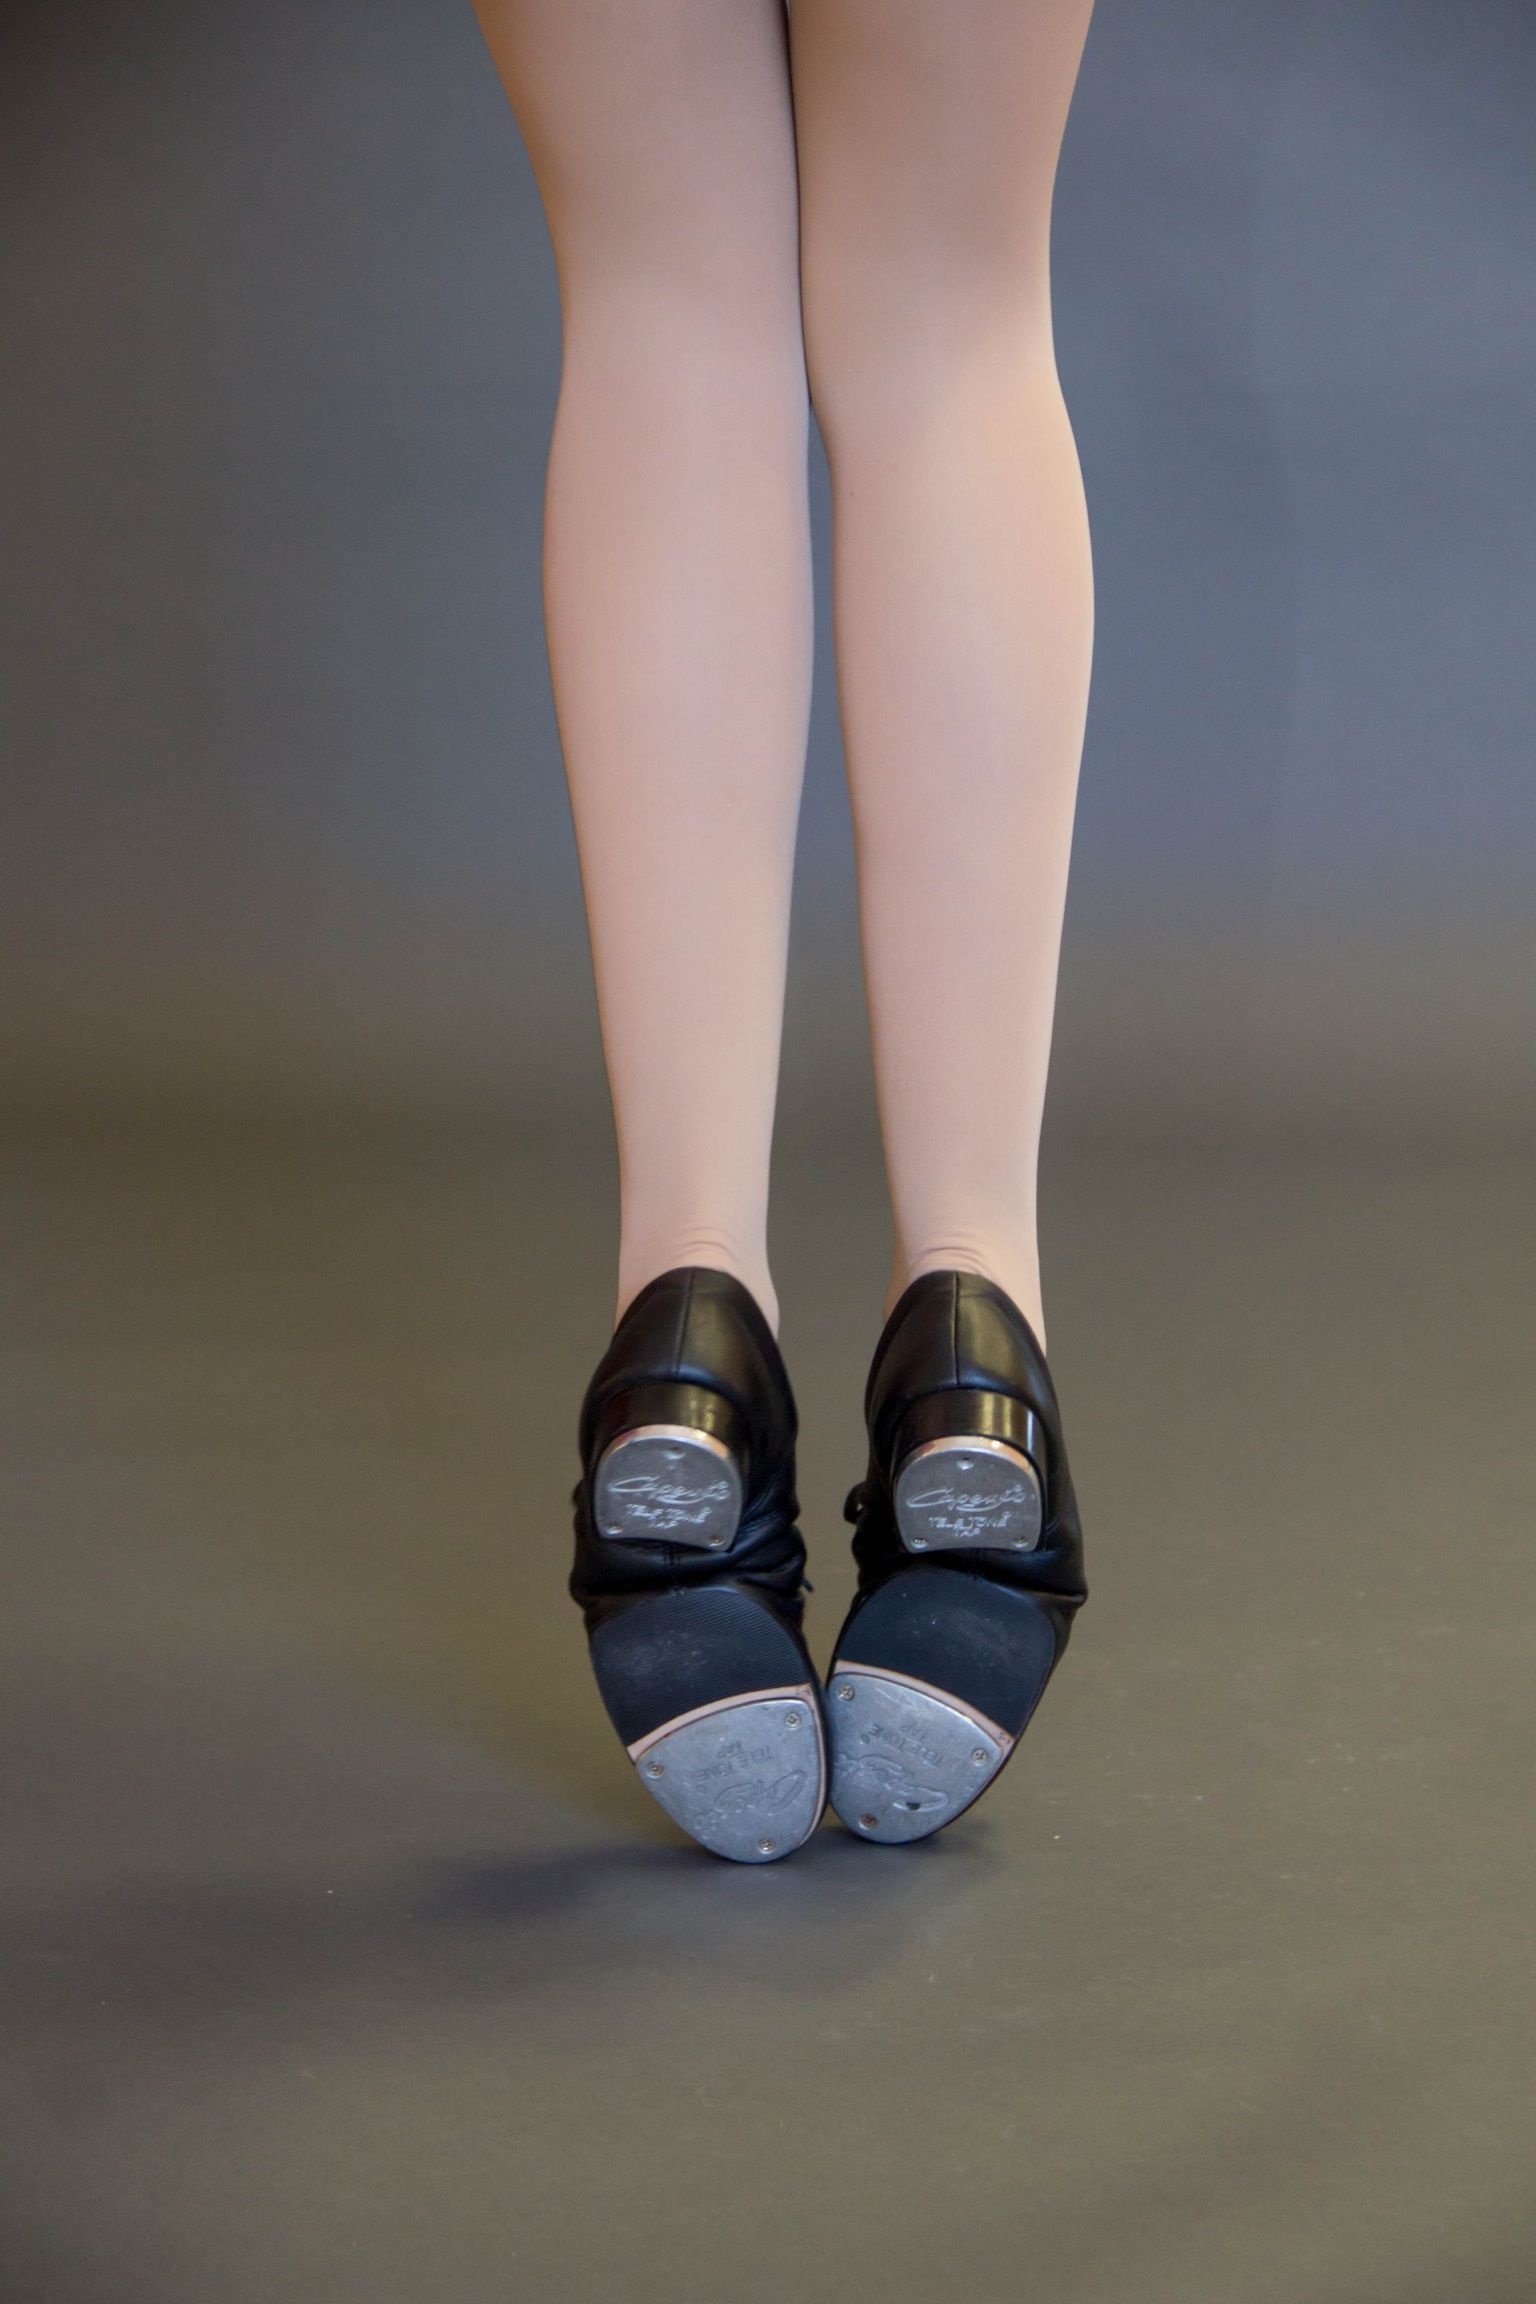 Tap Dance: Shoe Style International, Percussion, Metal tap on the bottom of heel and toe. 1540x2310 HD Wallpaper.